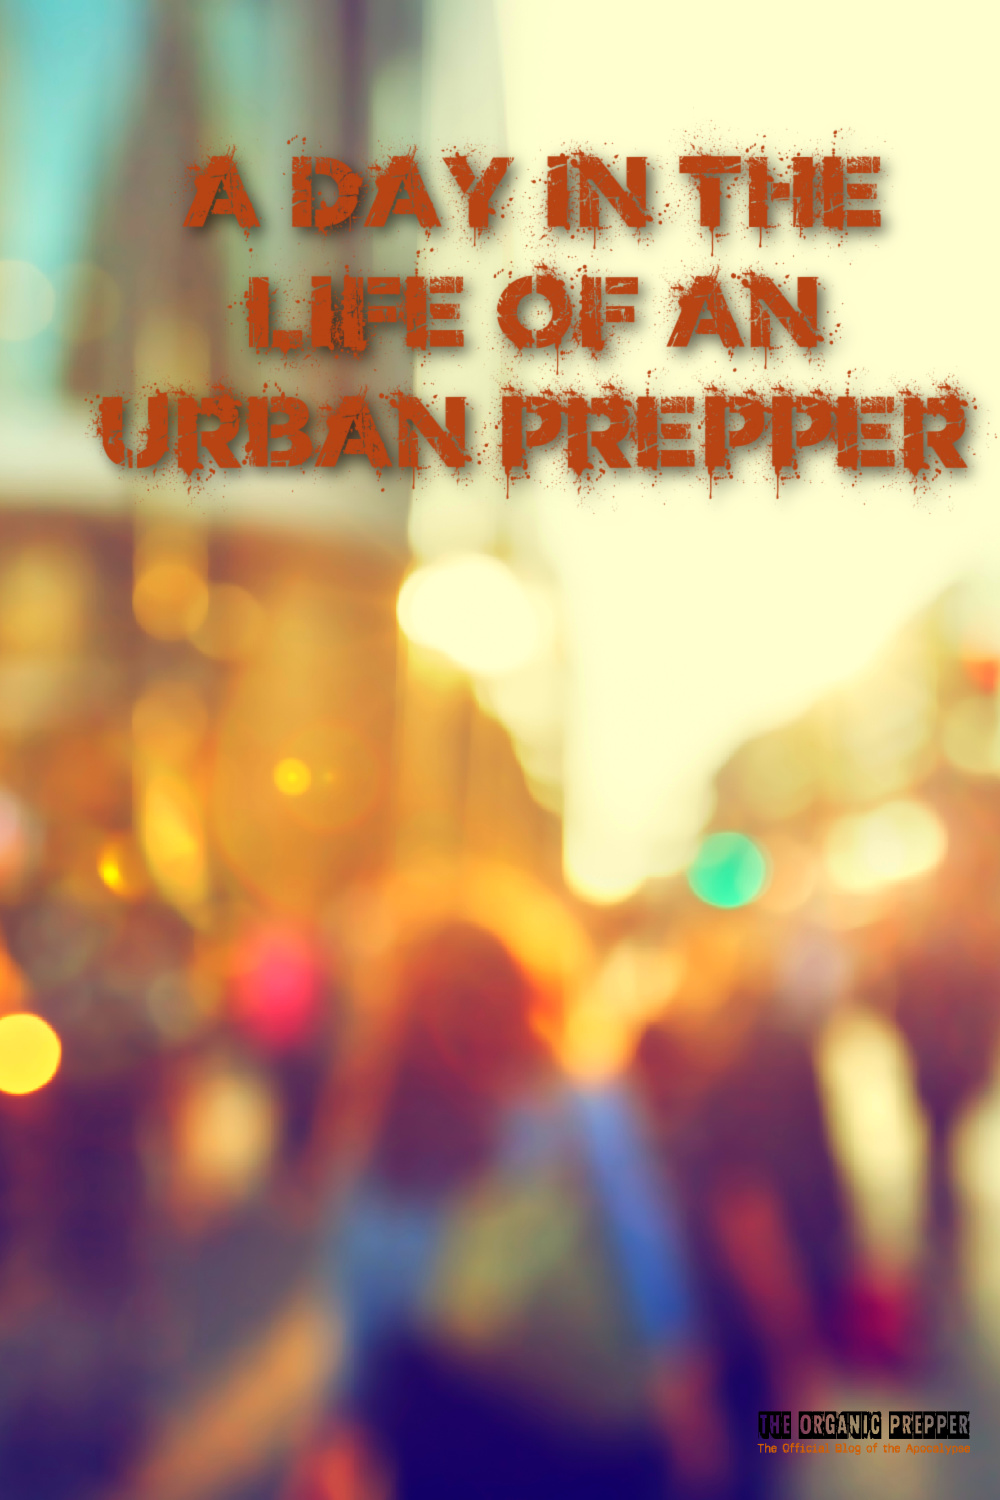 A Day in the Life of an Urban Prepper